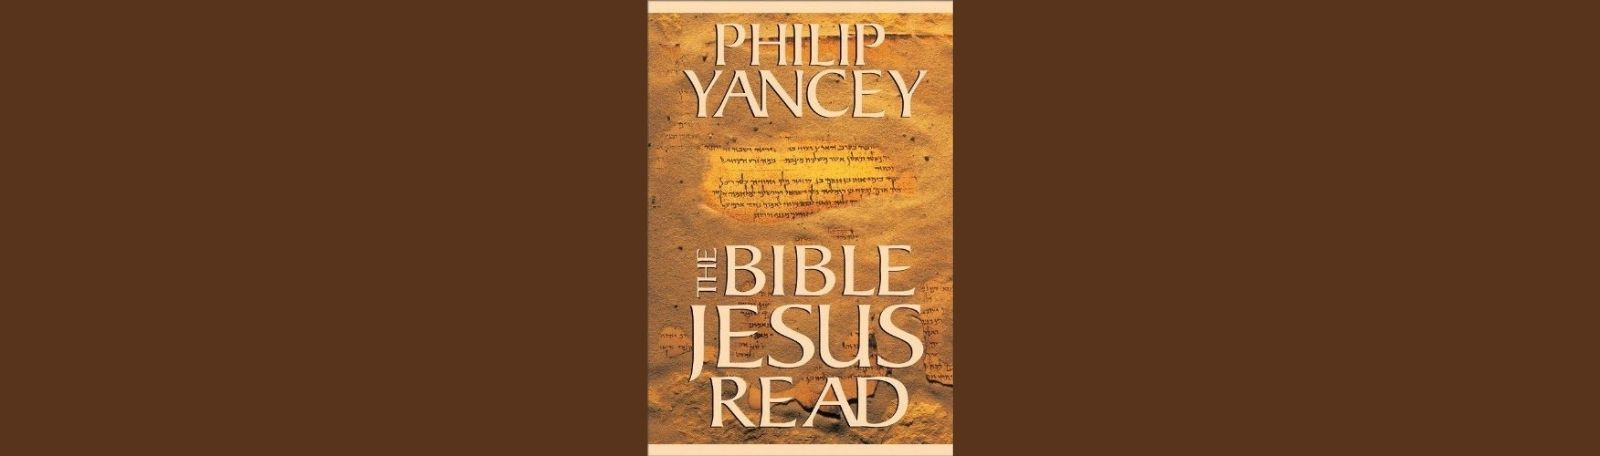 Featured image for “The Bible Jesus Read”